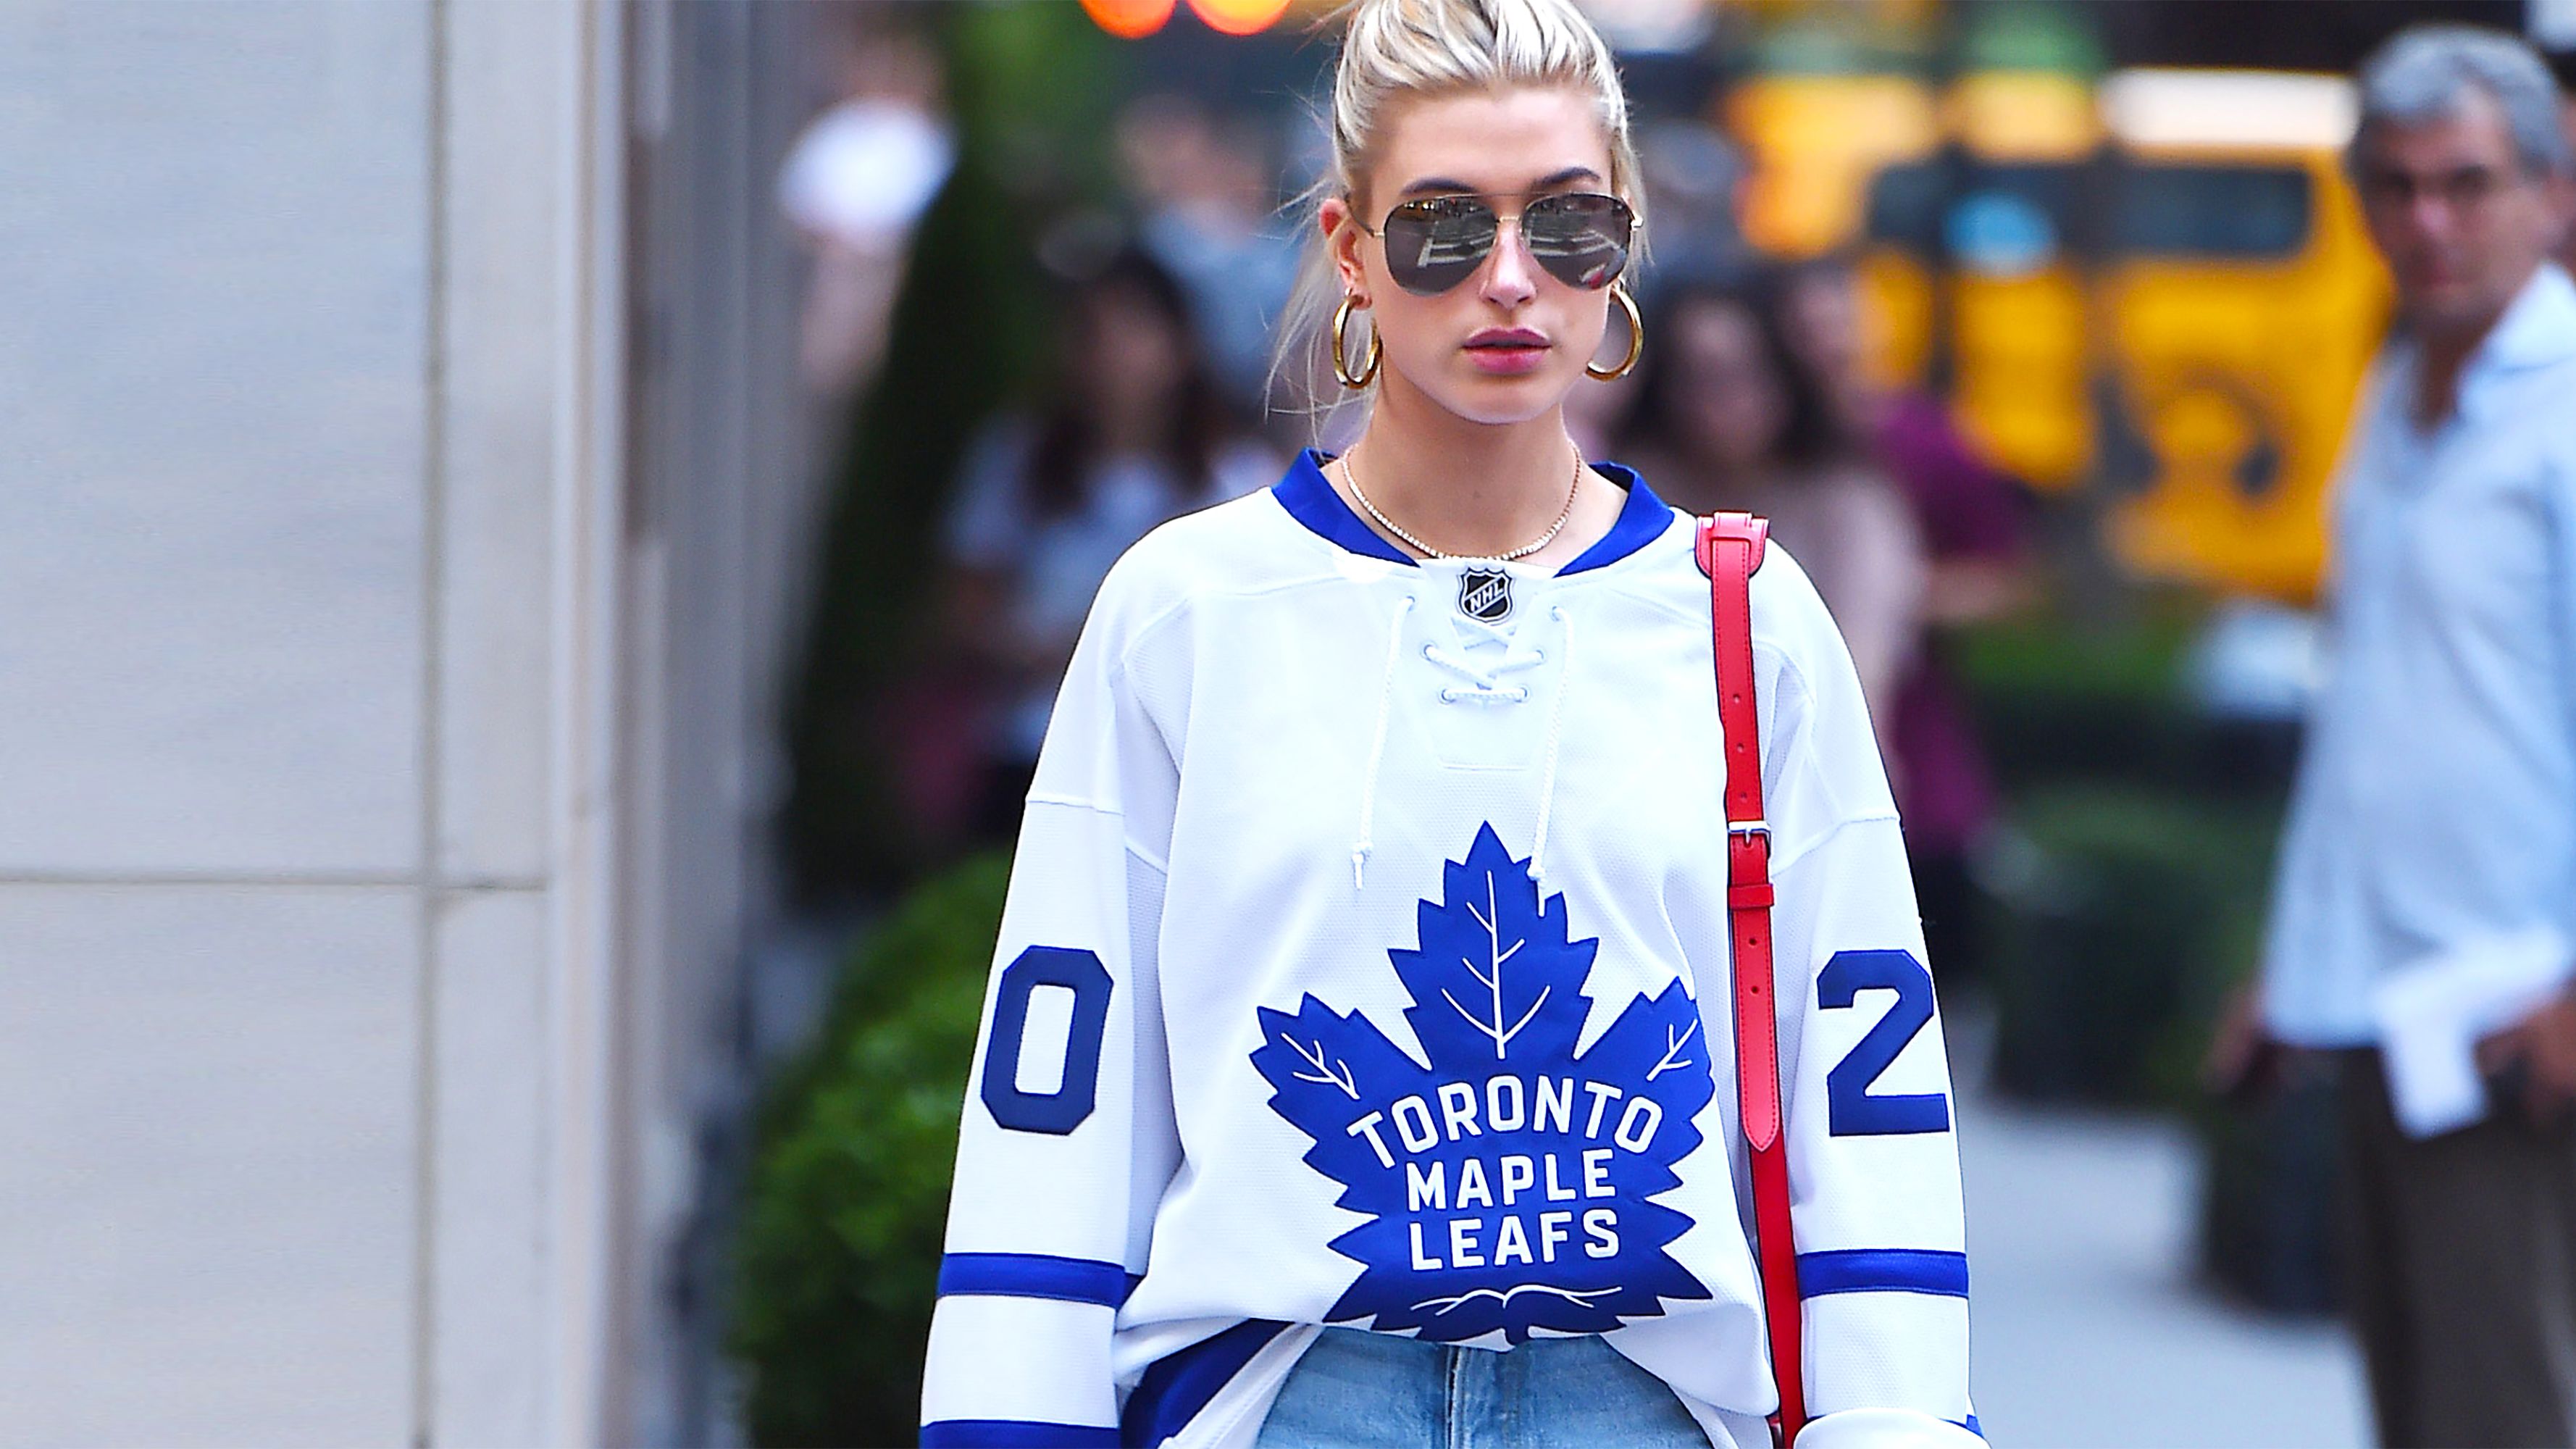 15 Stylish Sports Jersey Outfits - How to Wear a Cute Jersey